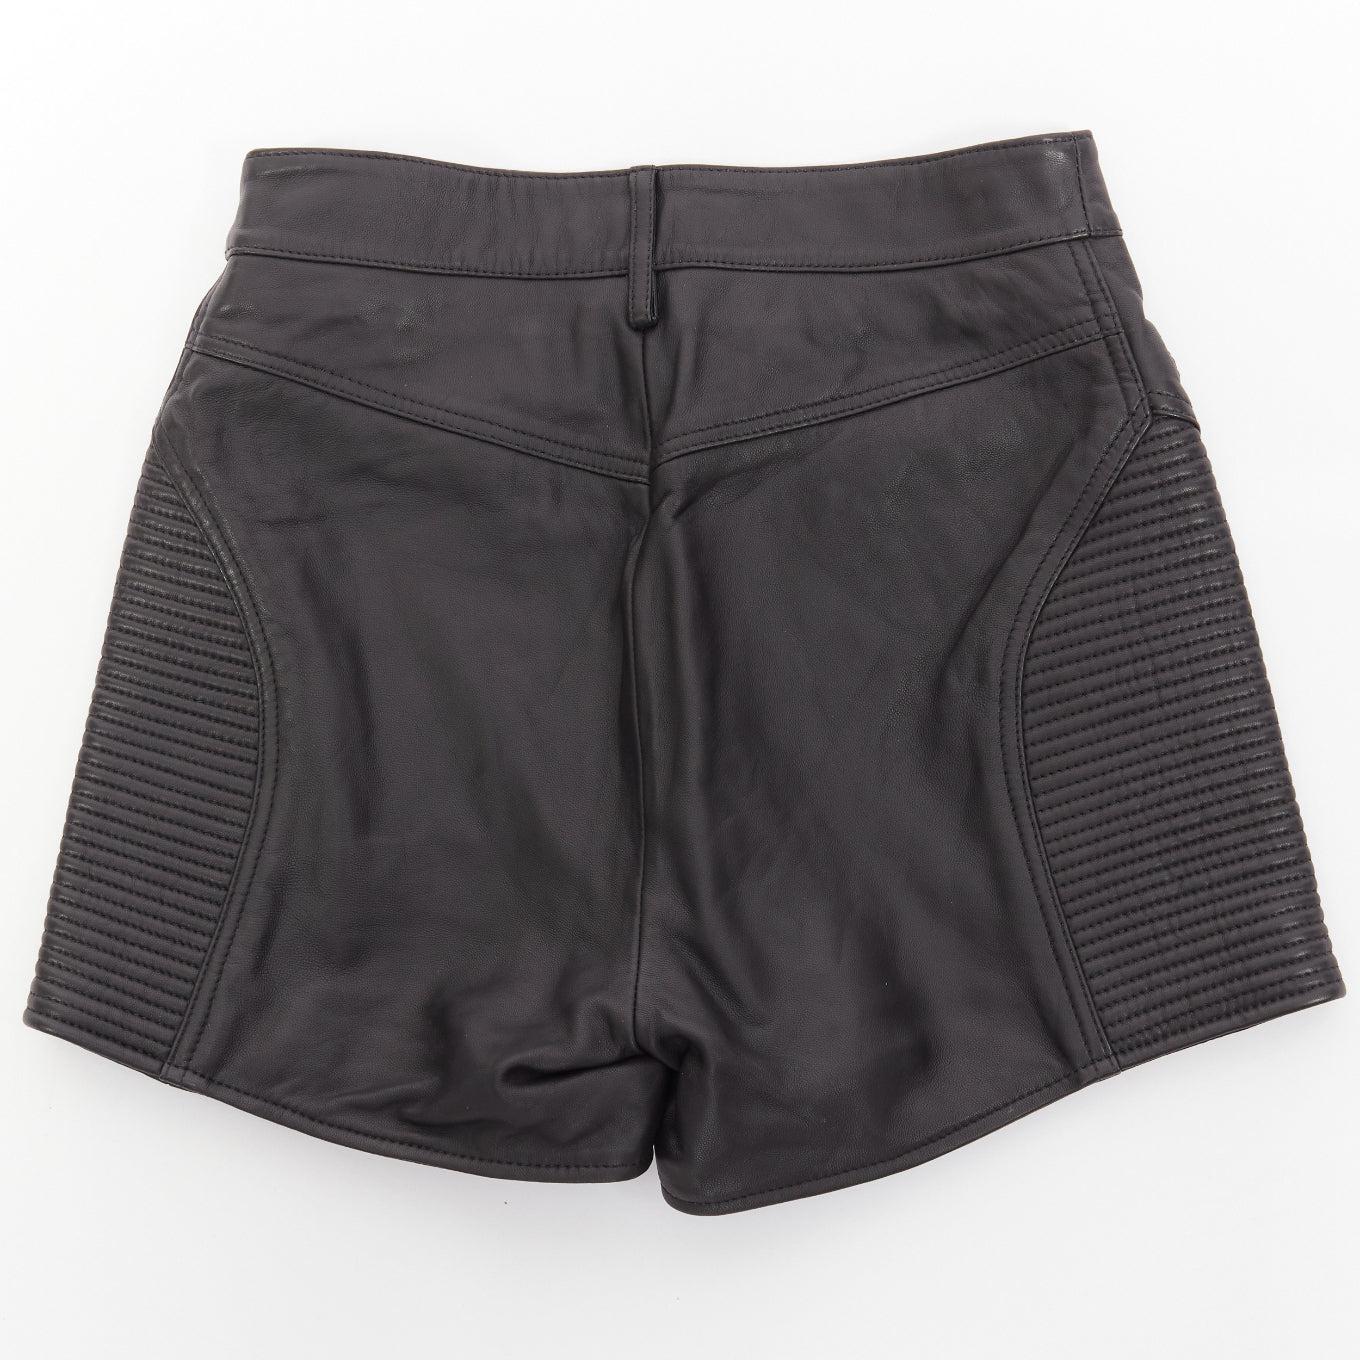 JUST CAVALLI black genuine leather silver zip motorcycle ribbed shorts IT38 XS
Reference: AAWC/A00972
Brand: Just Cavalli
Material: Leather
Color: Black, Silver
Pattern: Solid
Closure: Zip
Lining: Black Fabric
Made in: India

CONDITION:
Condition: